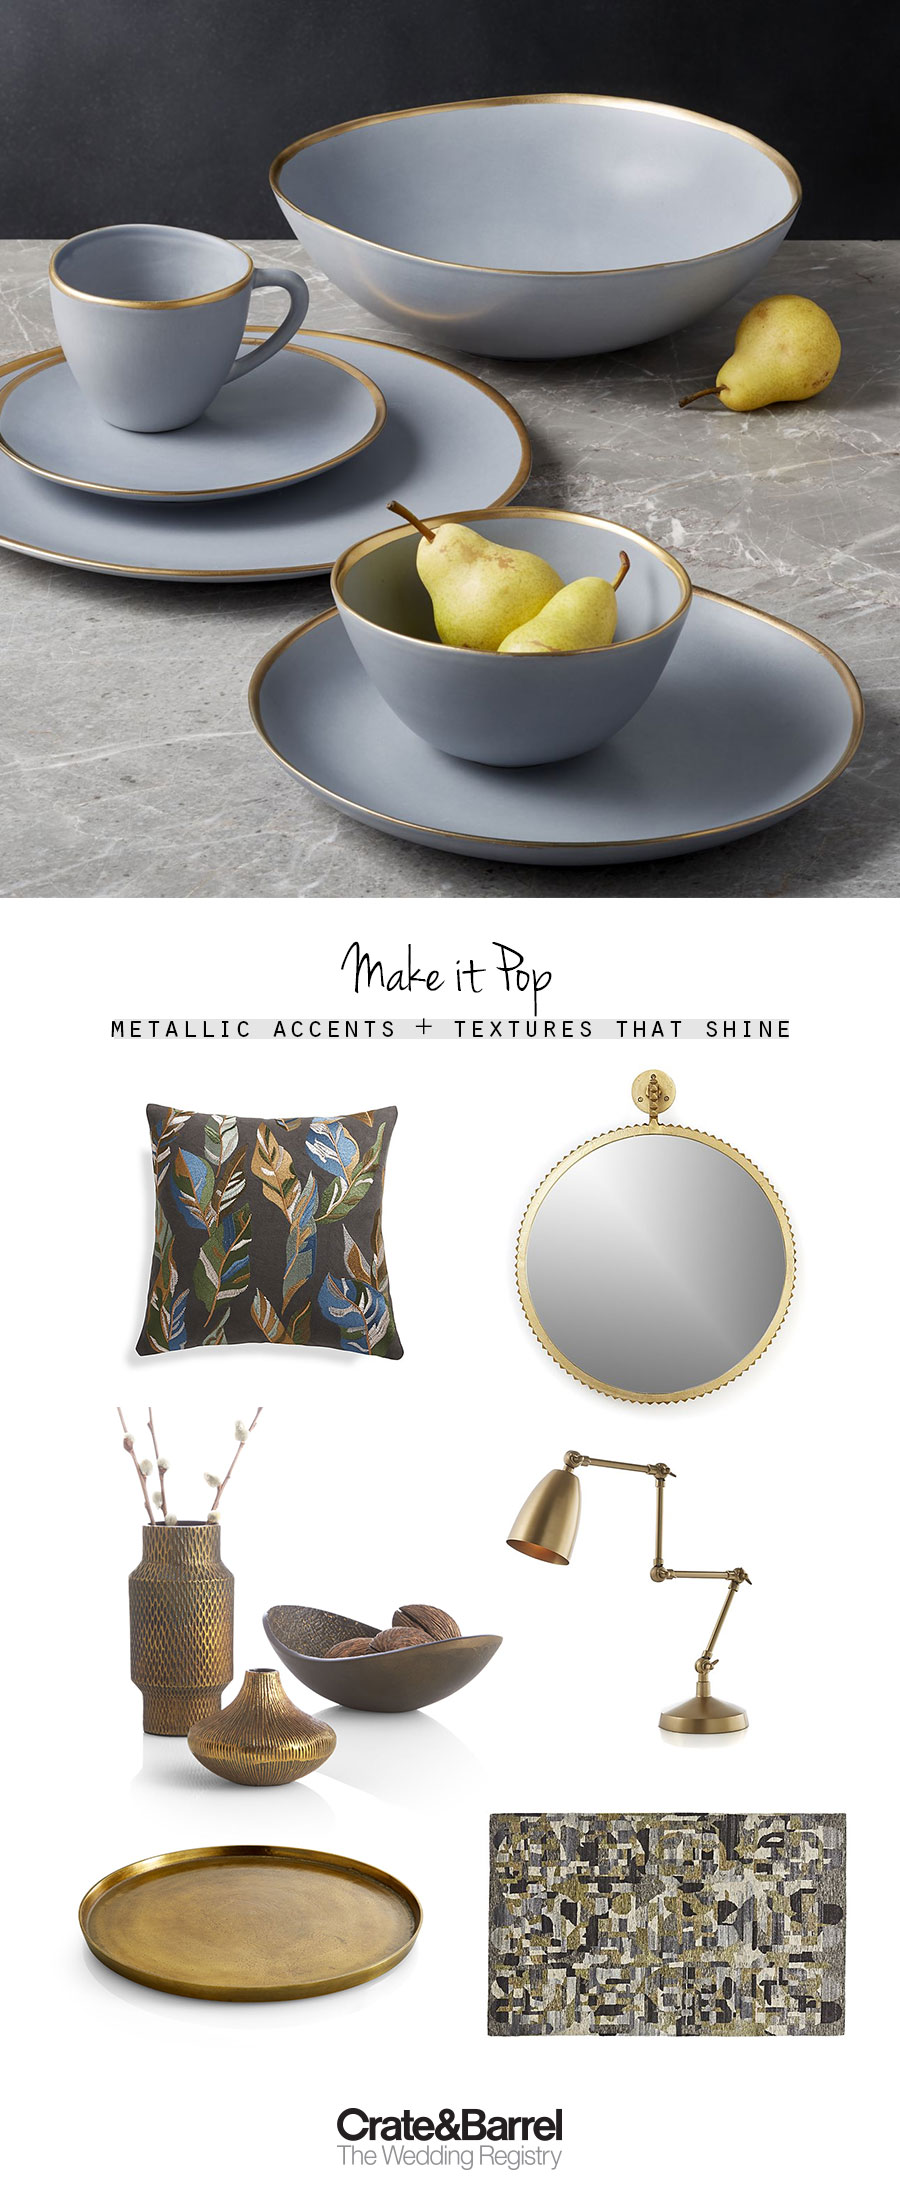 crate and barrel the wedding registry blue gold texture picks